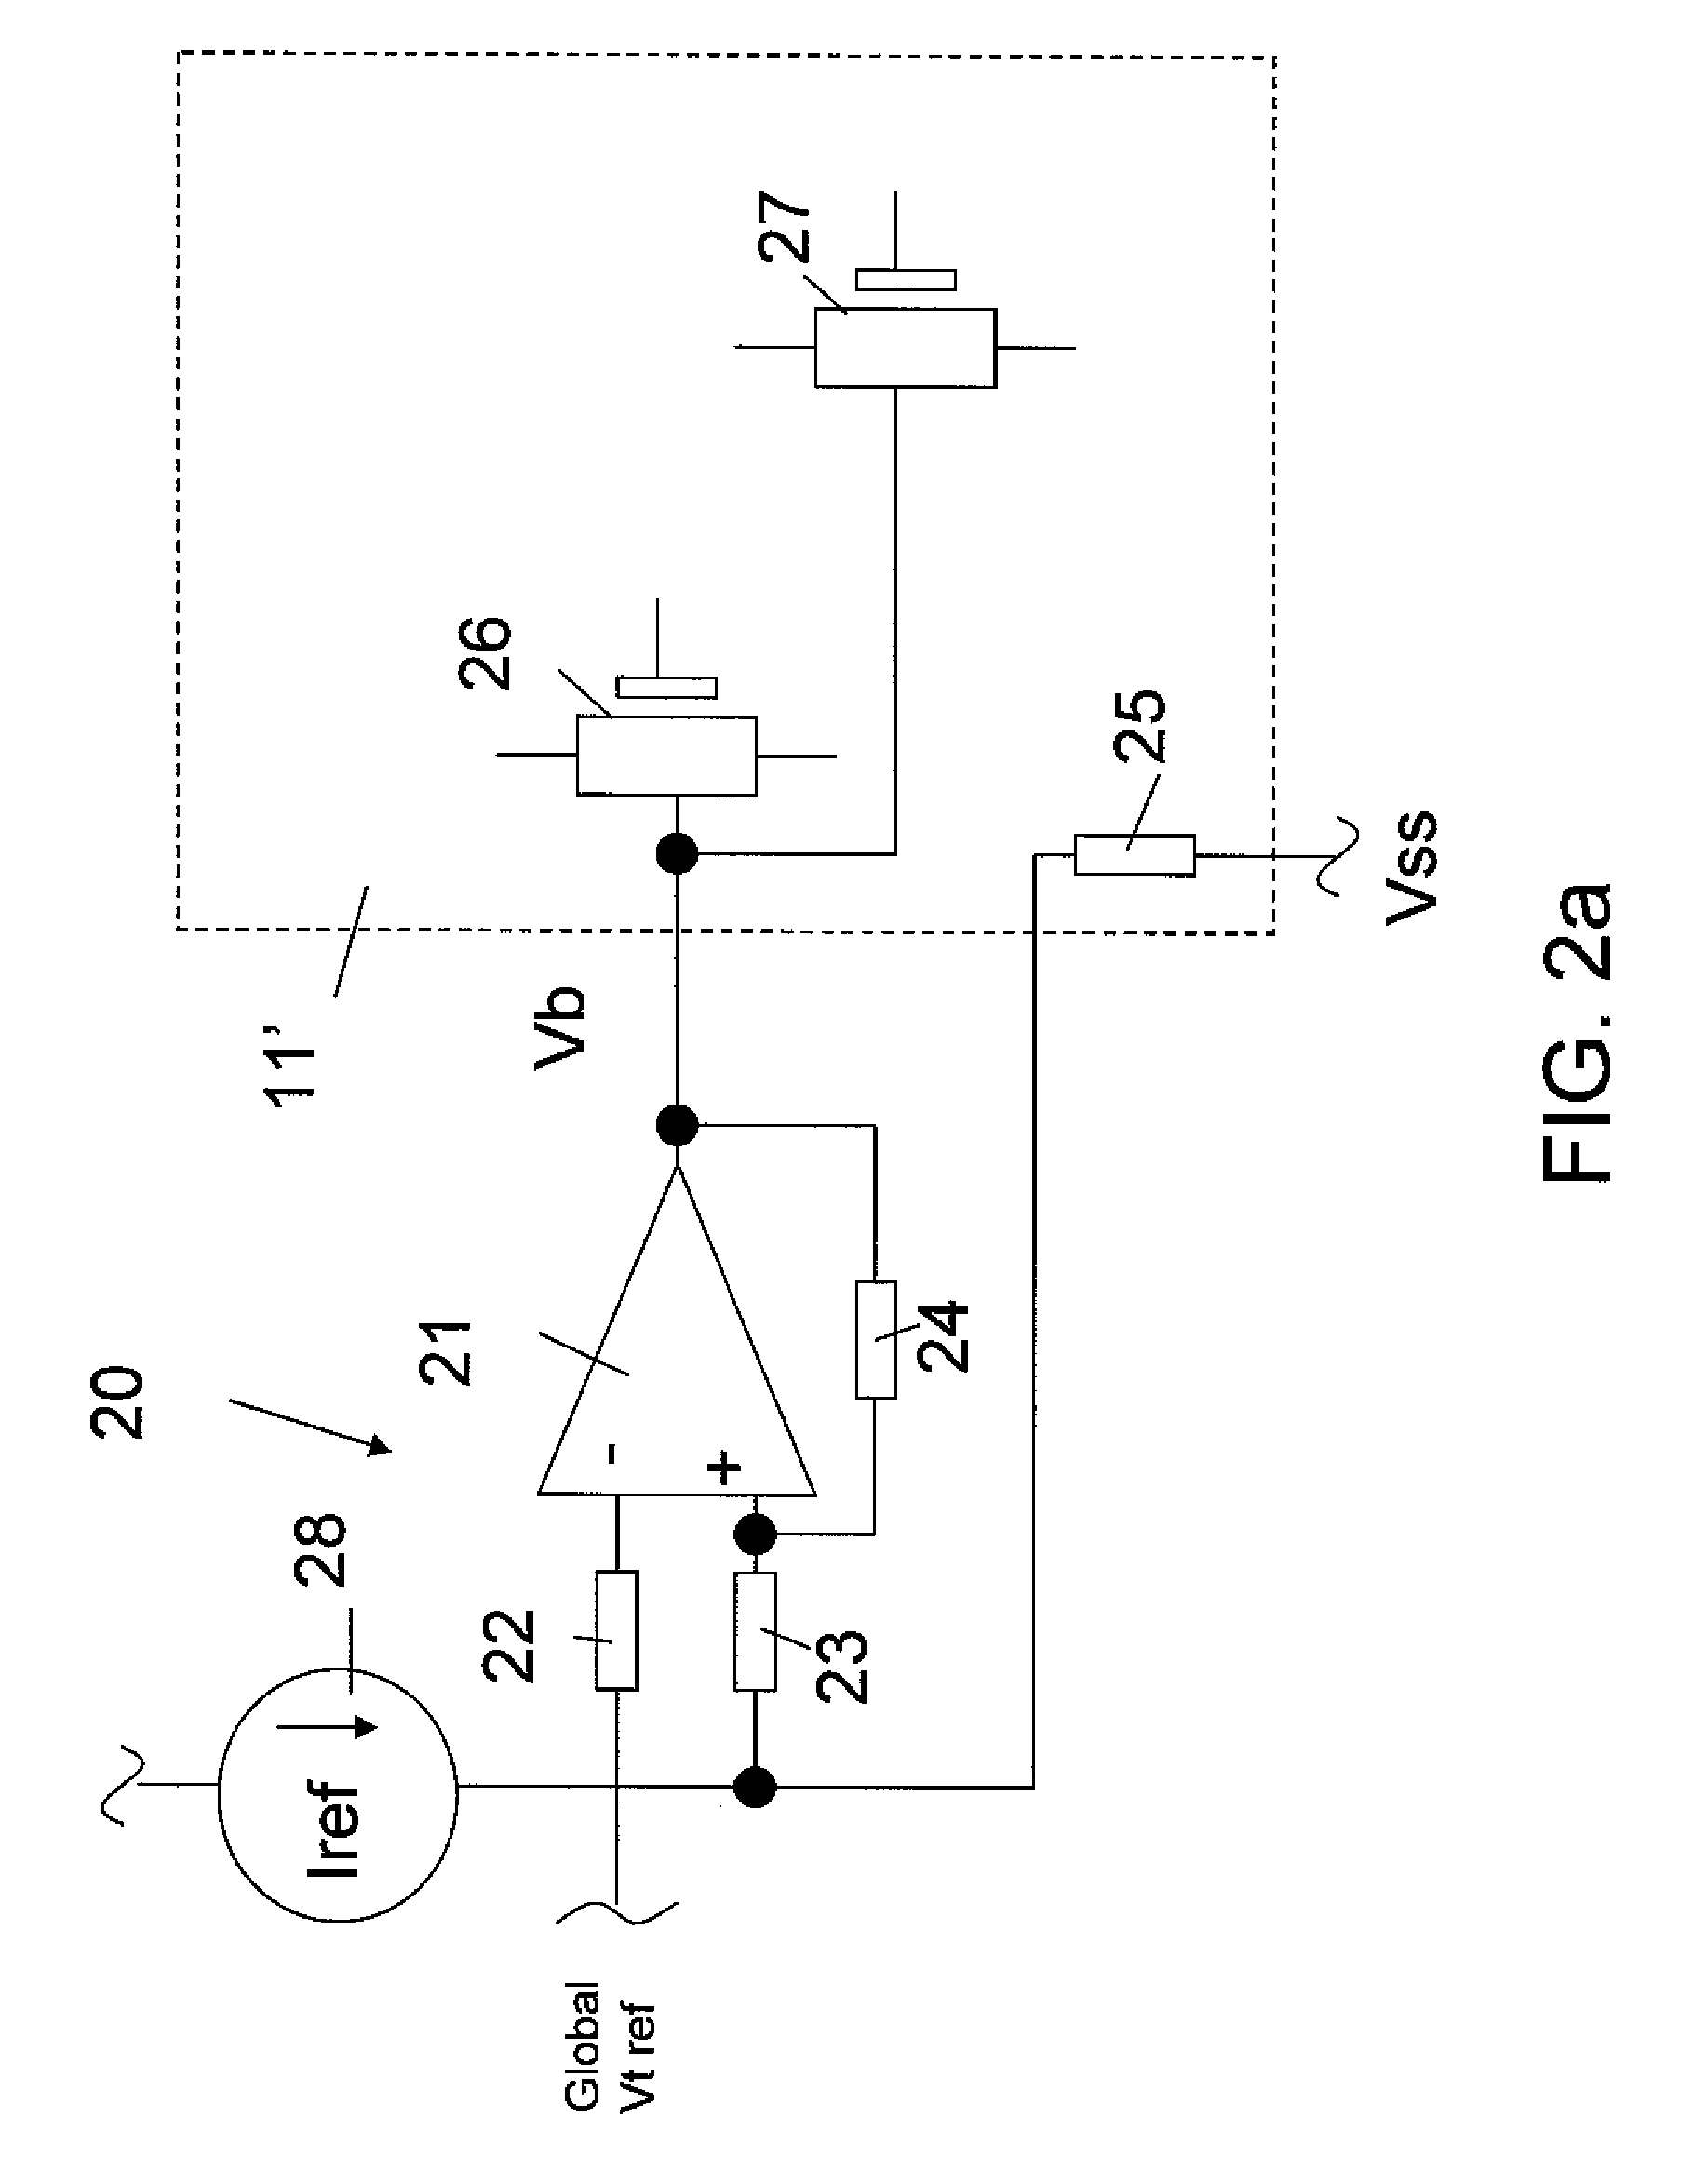 Circuit to compensate threshold voltage variation due to process variation